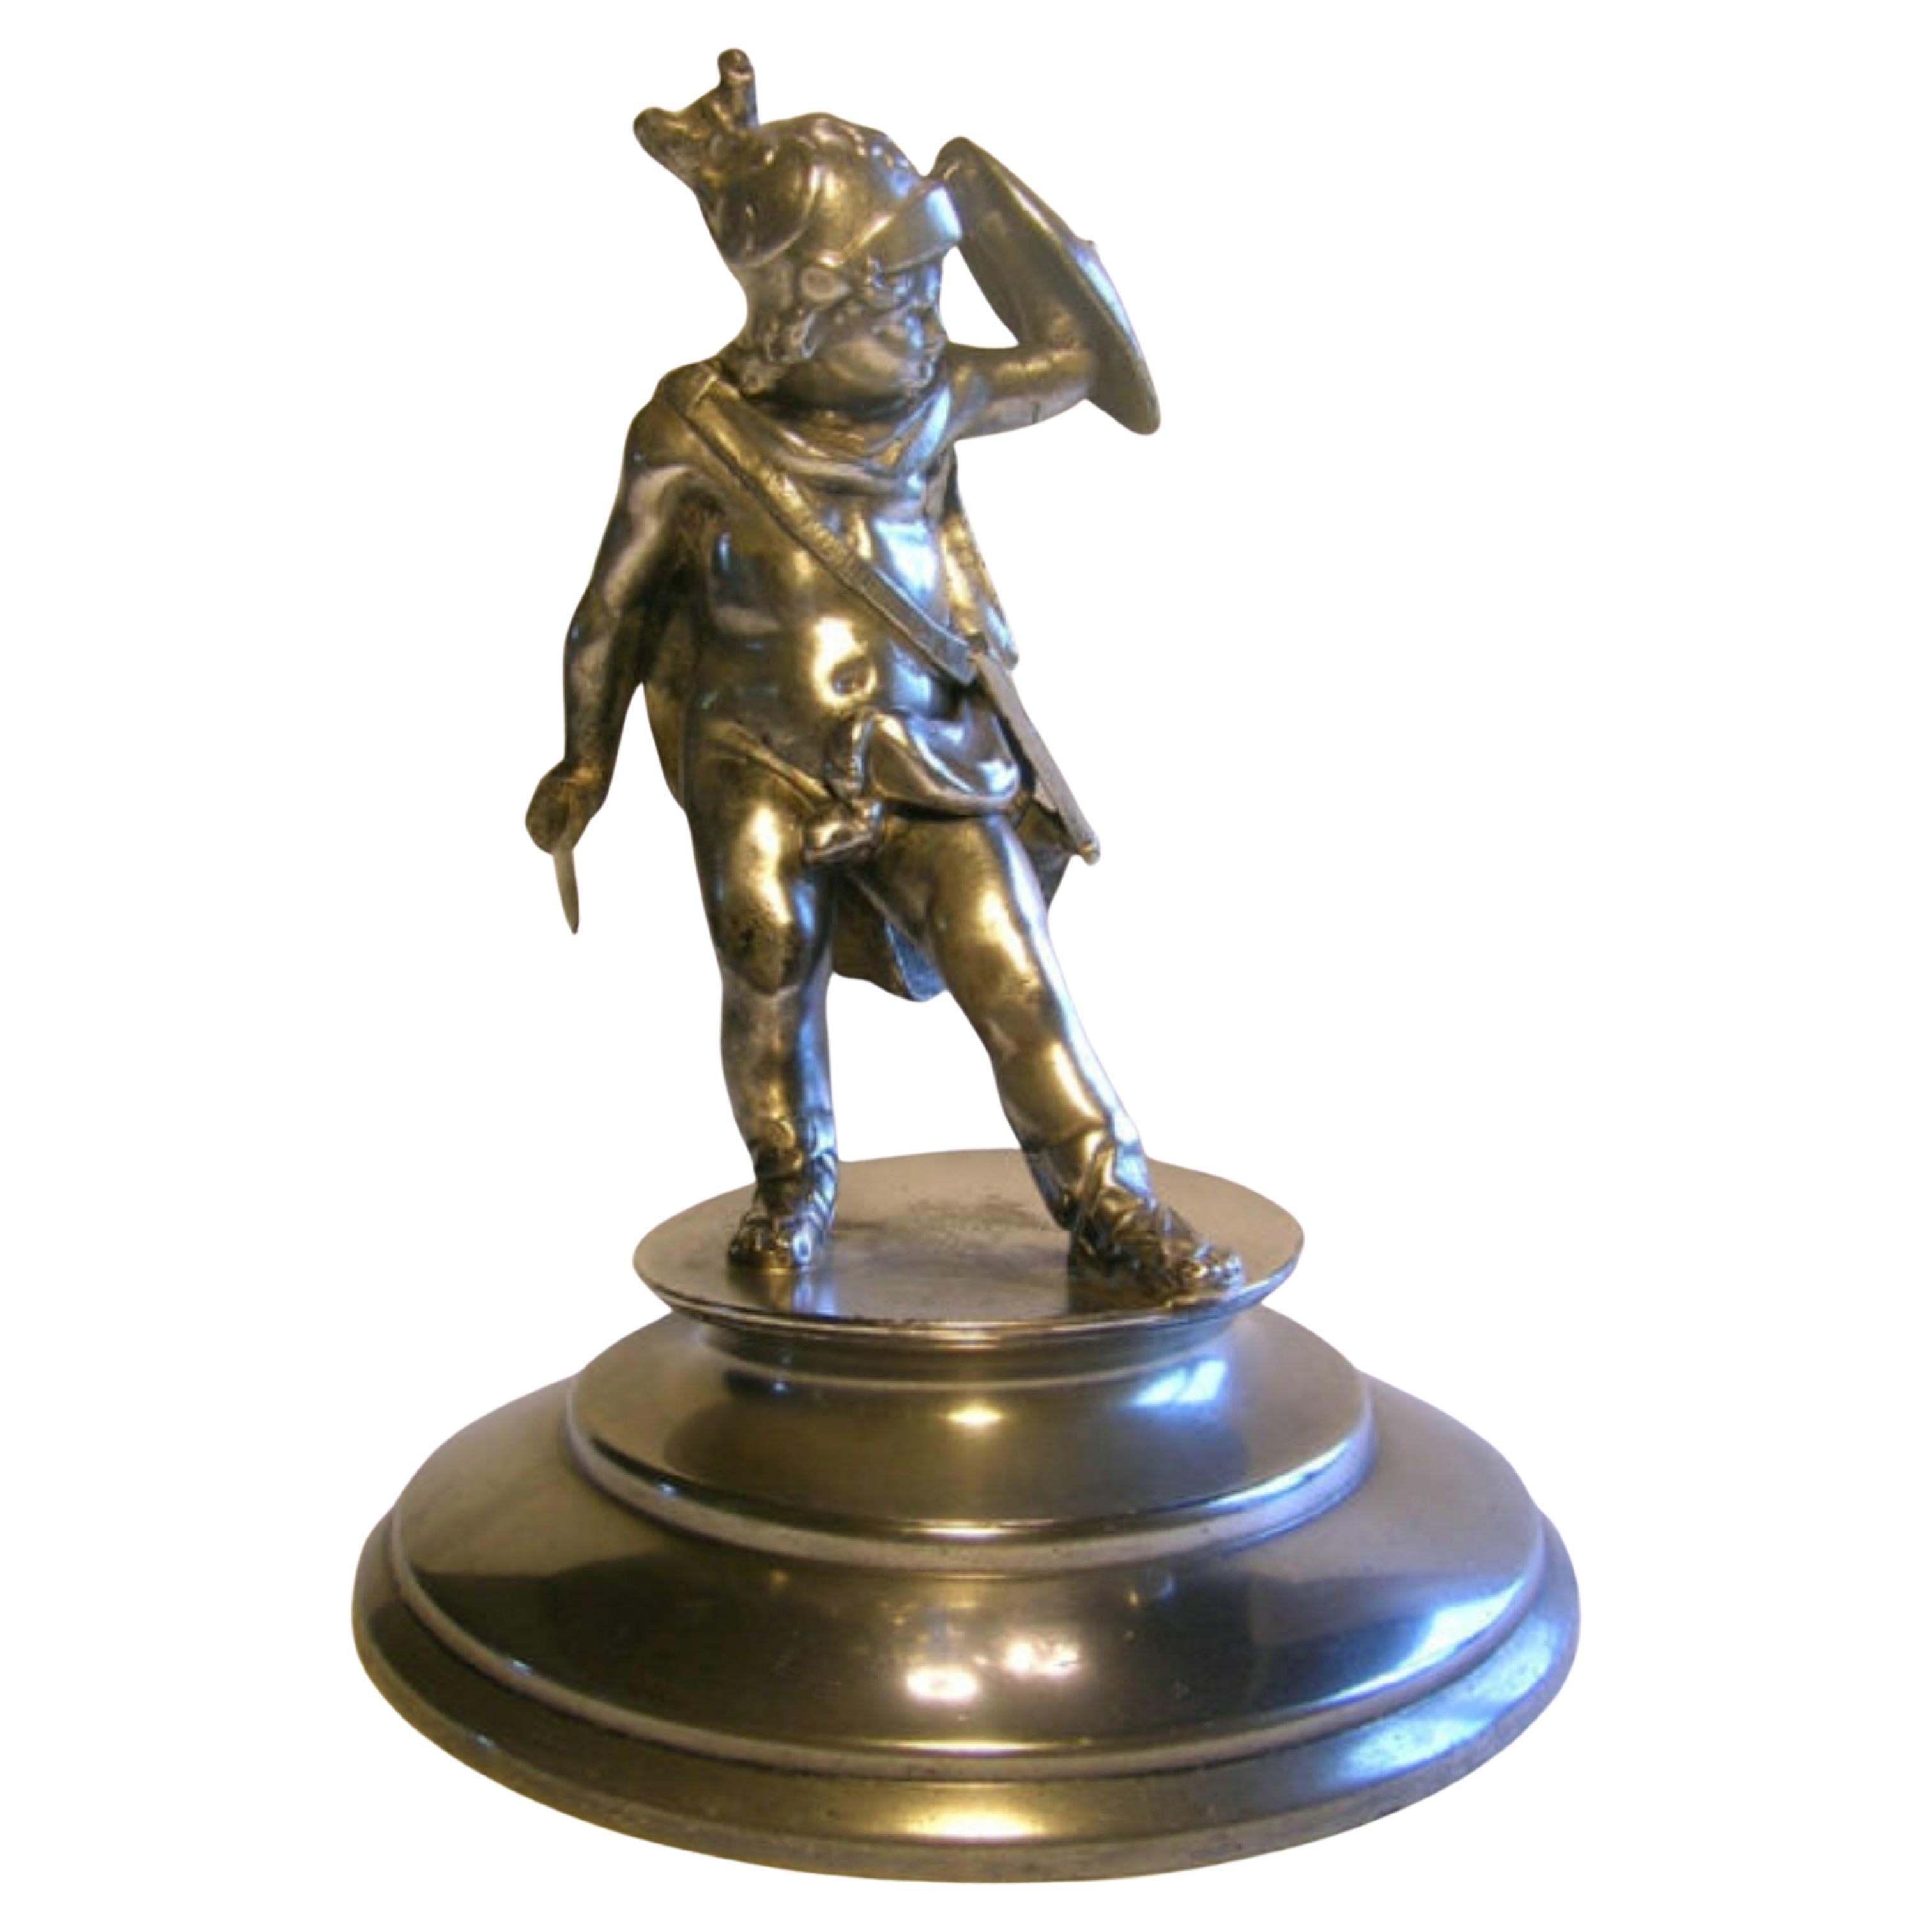 MIDDLETOWN PLATE CO. - Antique Neoclassical Warrior Statue - U.S. - Late 19th C. For Sale